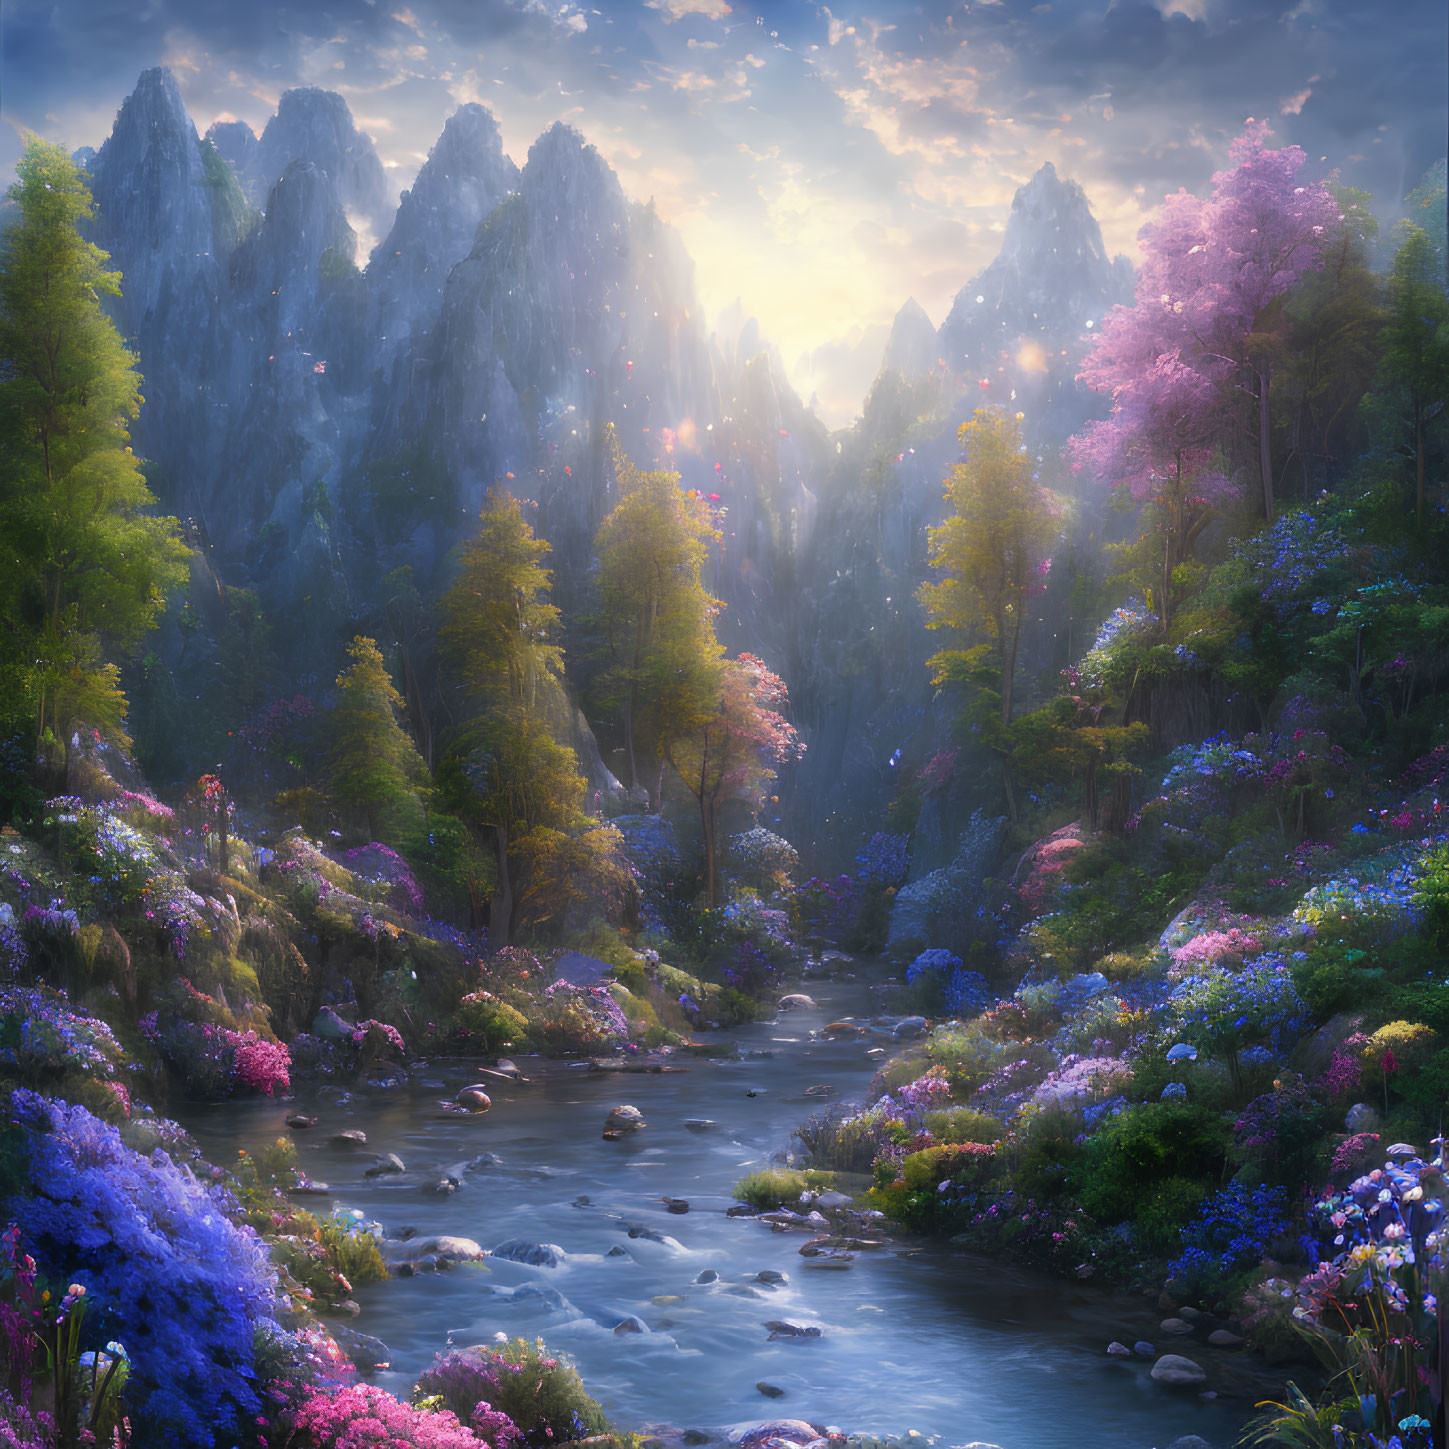 Serene landscape with river, rocky peaks, sunrise, mist, and blooming flora